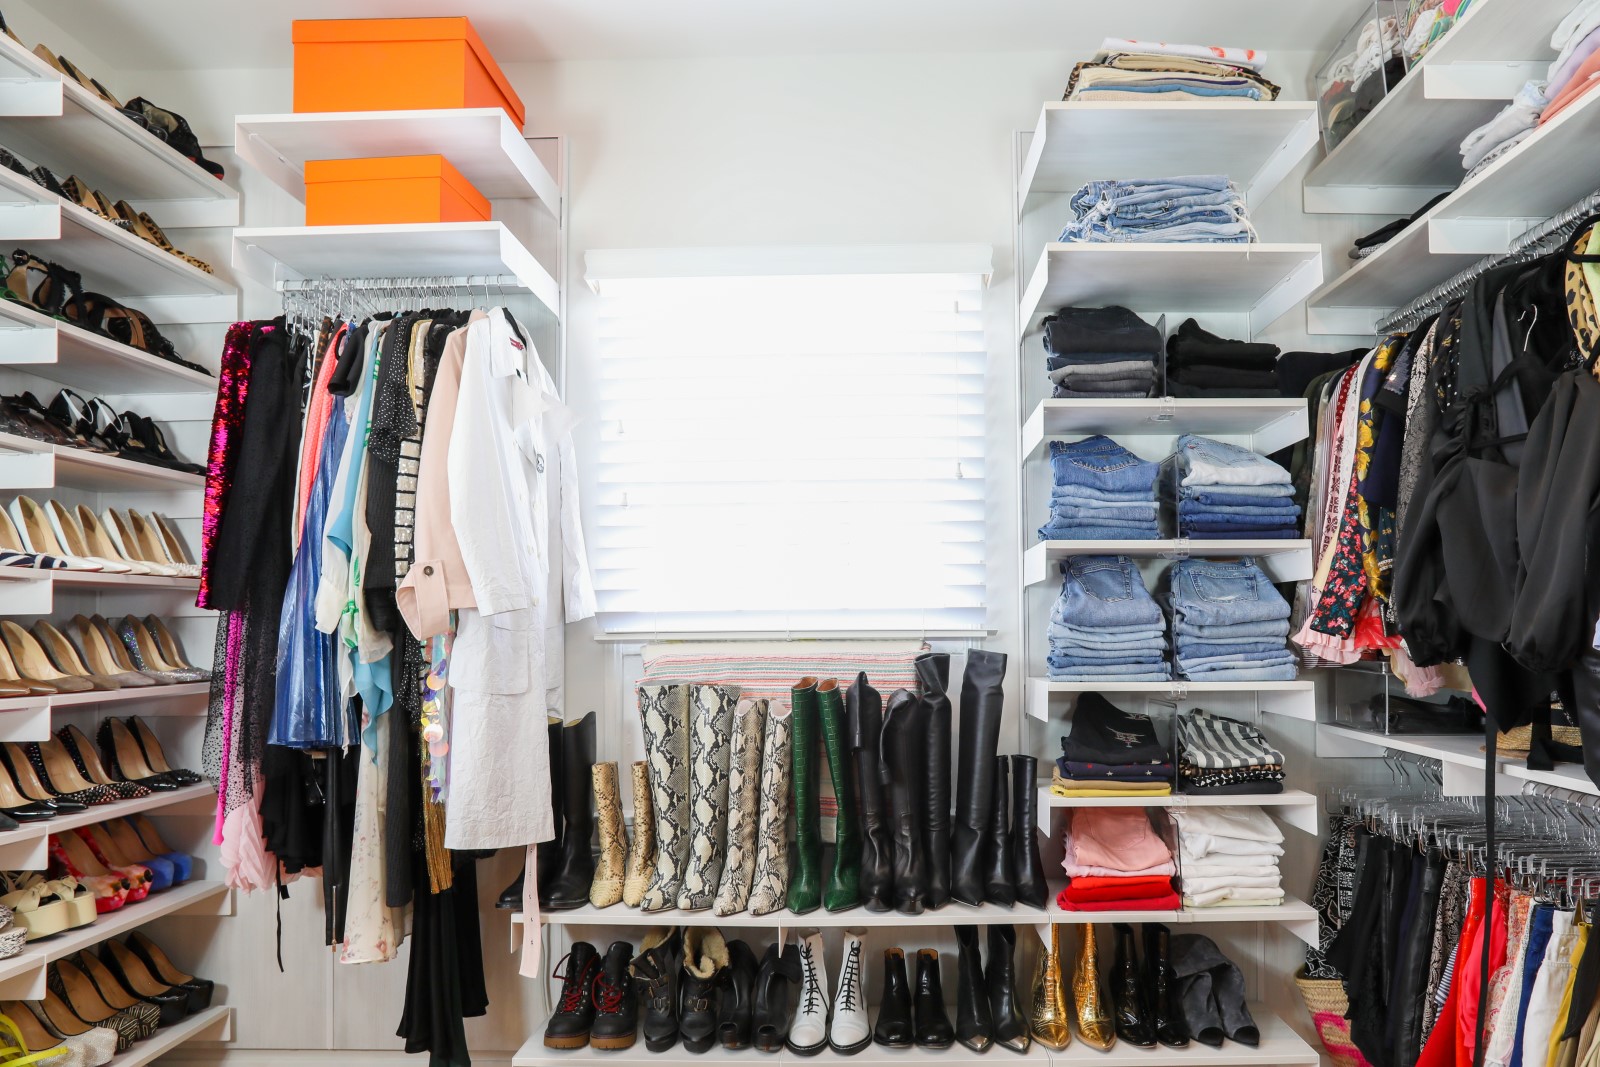 Making Master Closet Dreams Come True With Avera | Container Stories